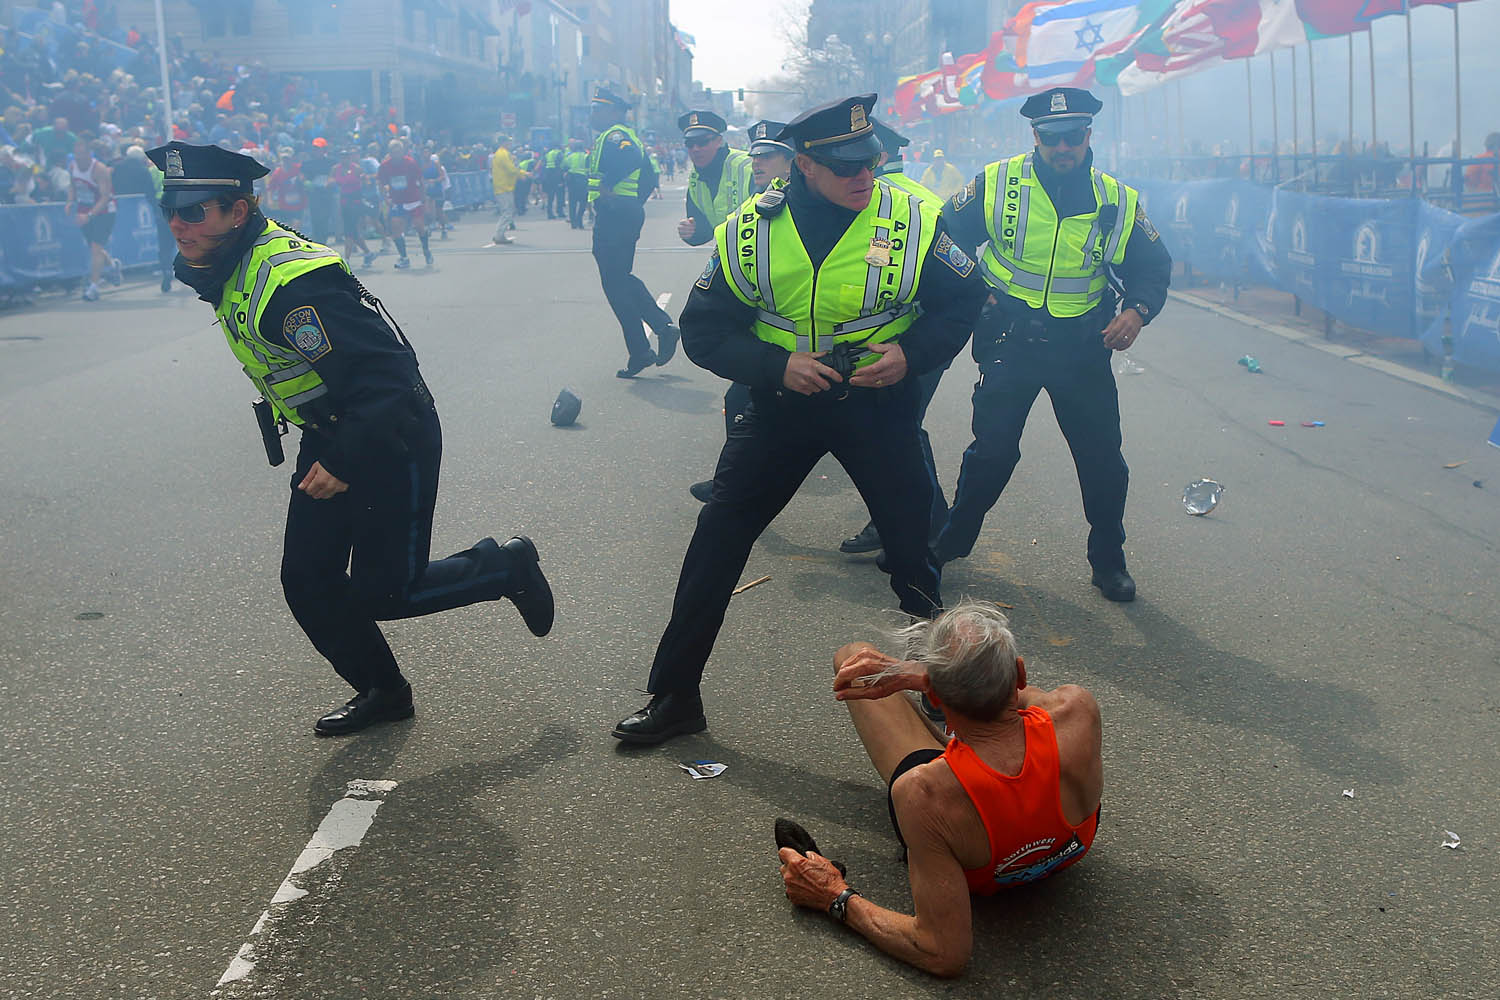 April 15, 2013. Police officers with their guns drawn hear the second explosion down the street. The first explosion knocked down a runner at the finish line of the 117th Boston Marathon.